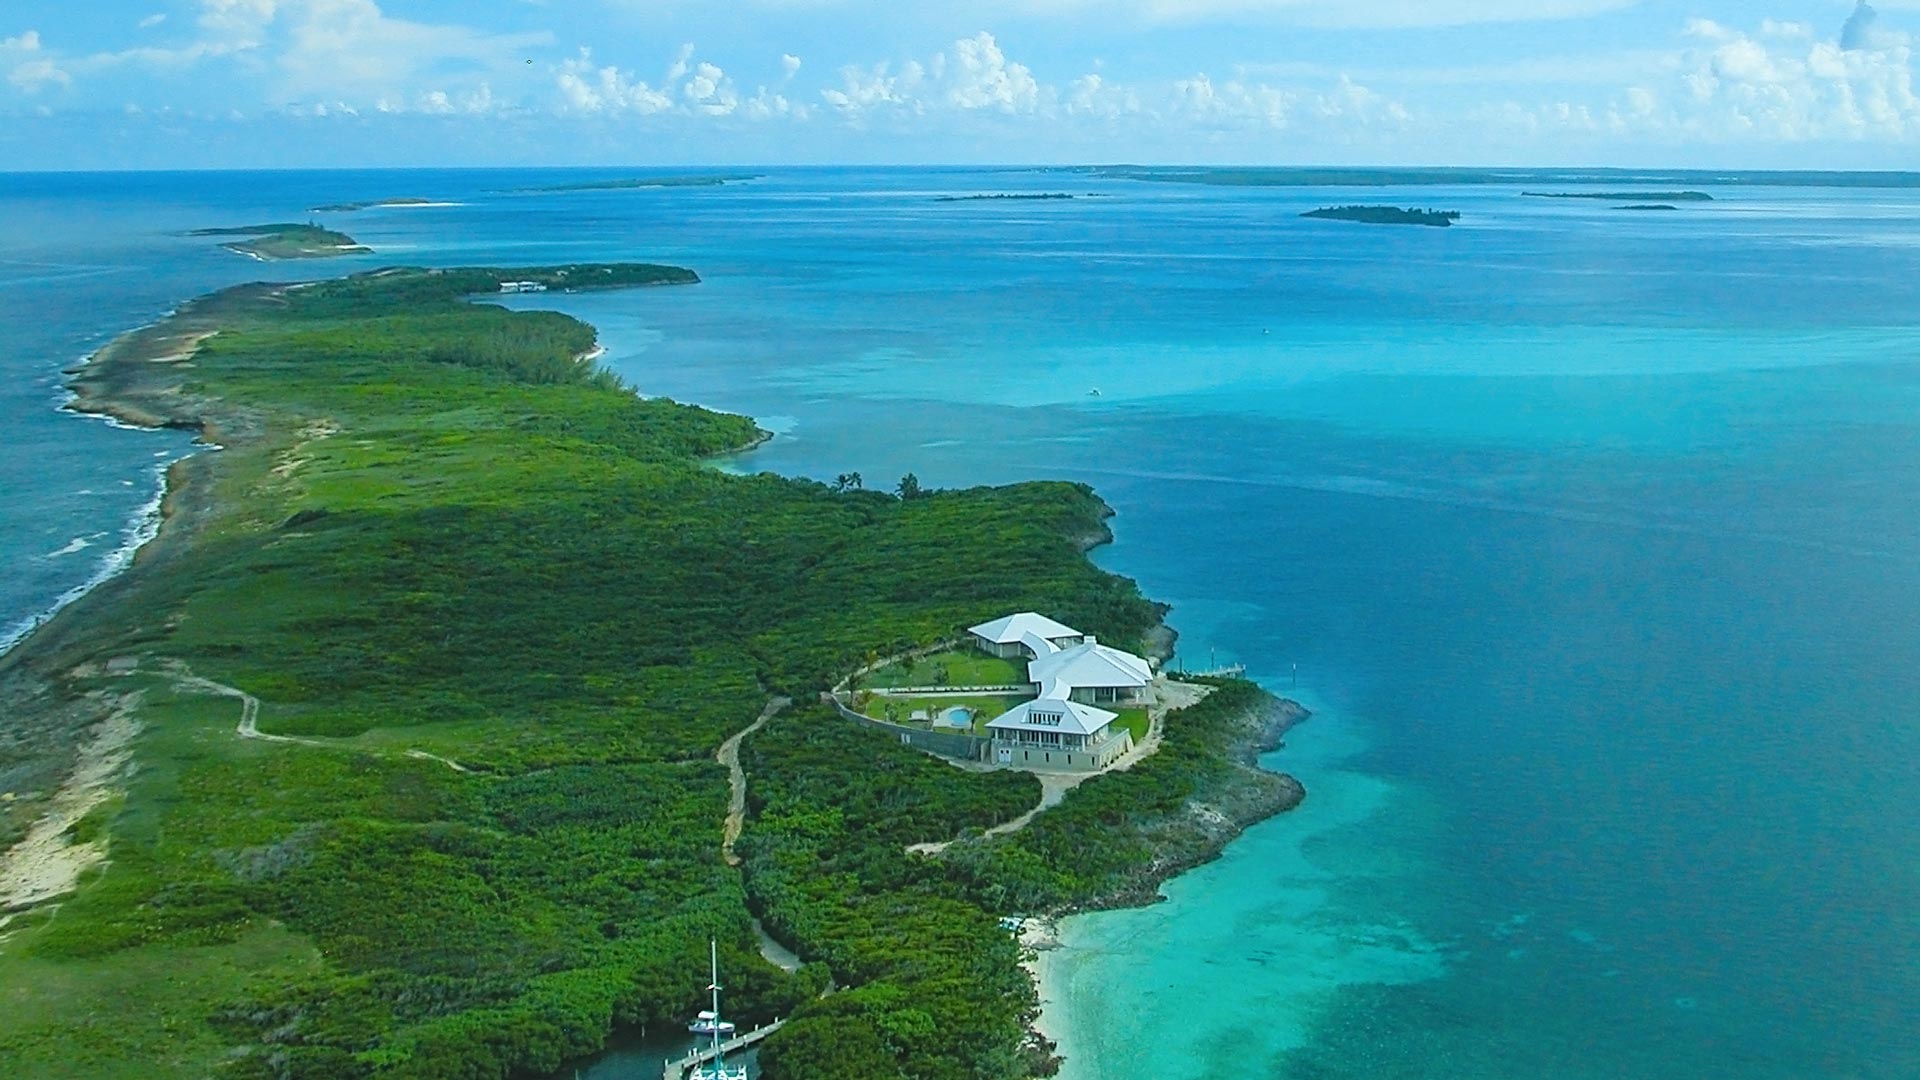 Tilloo Pond and neighboring island in the sea of Abaco